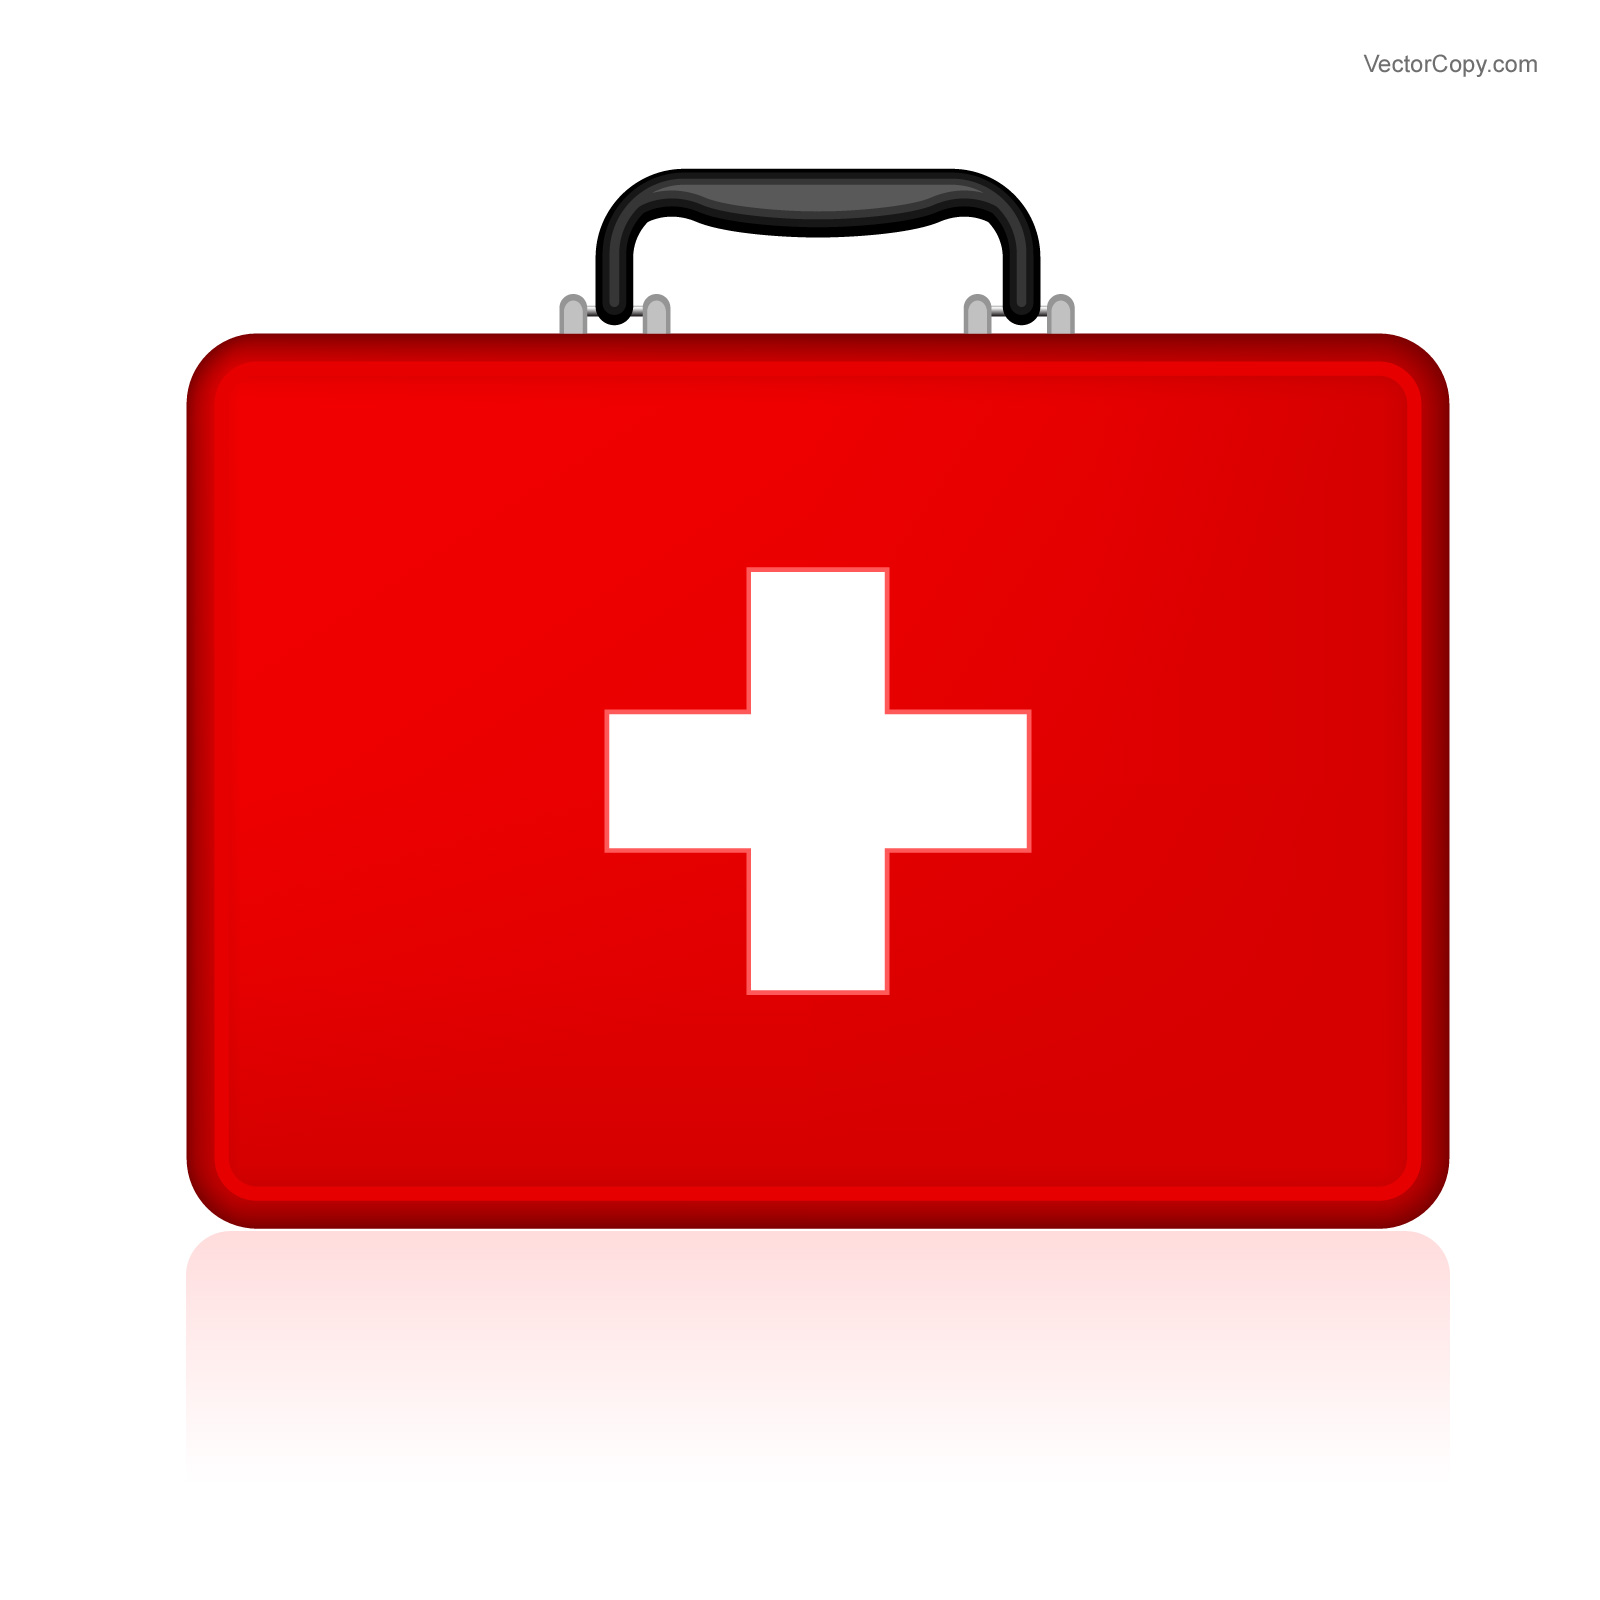 Clipart First Aid Kit - ClipArt Best